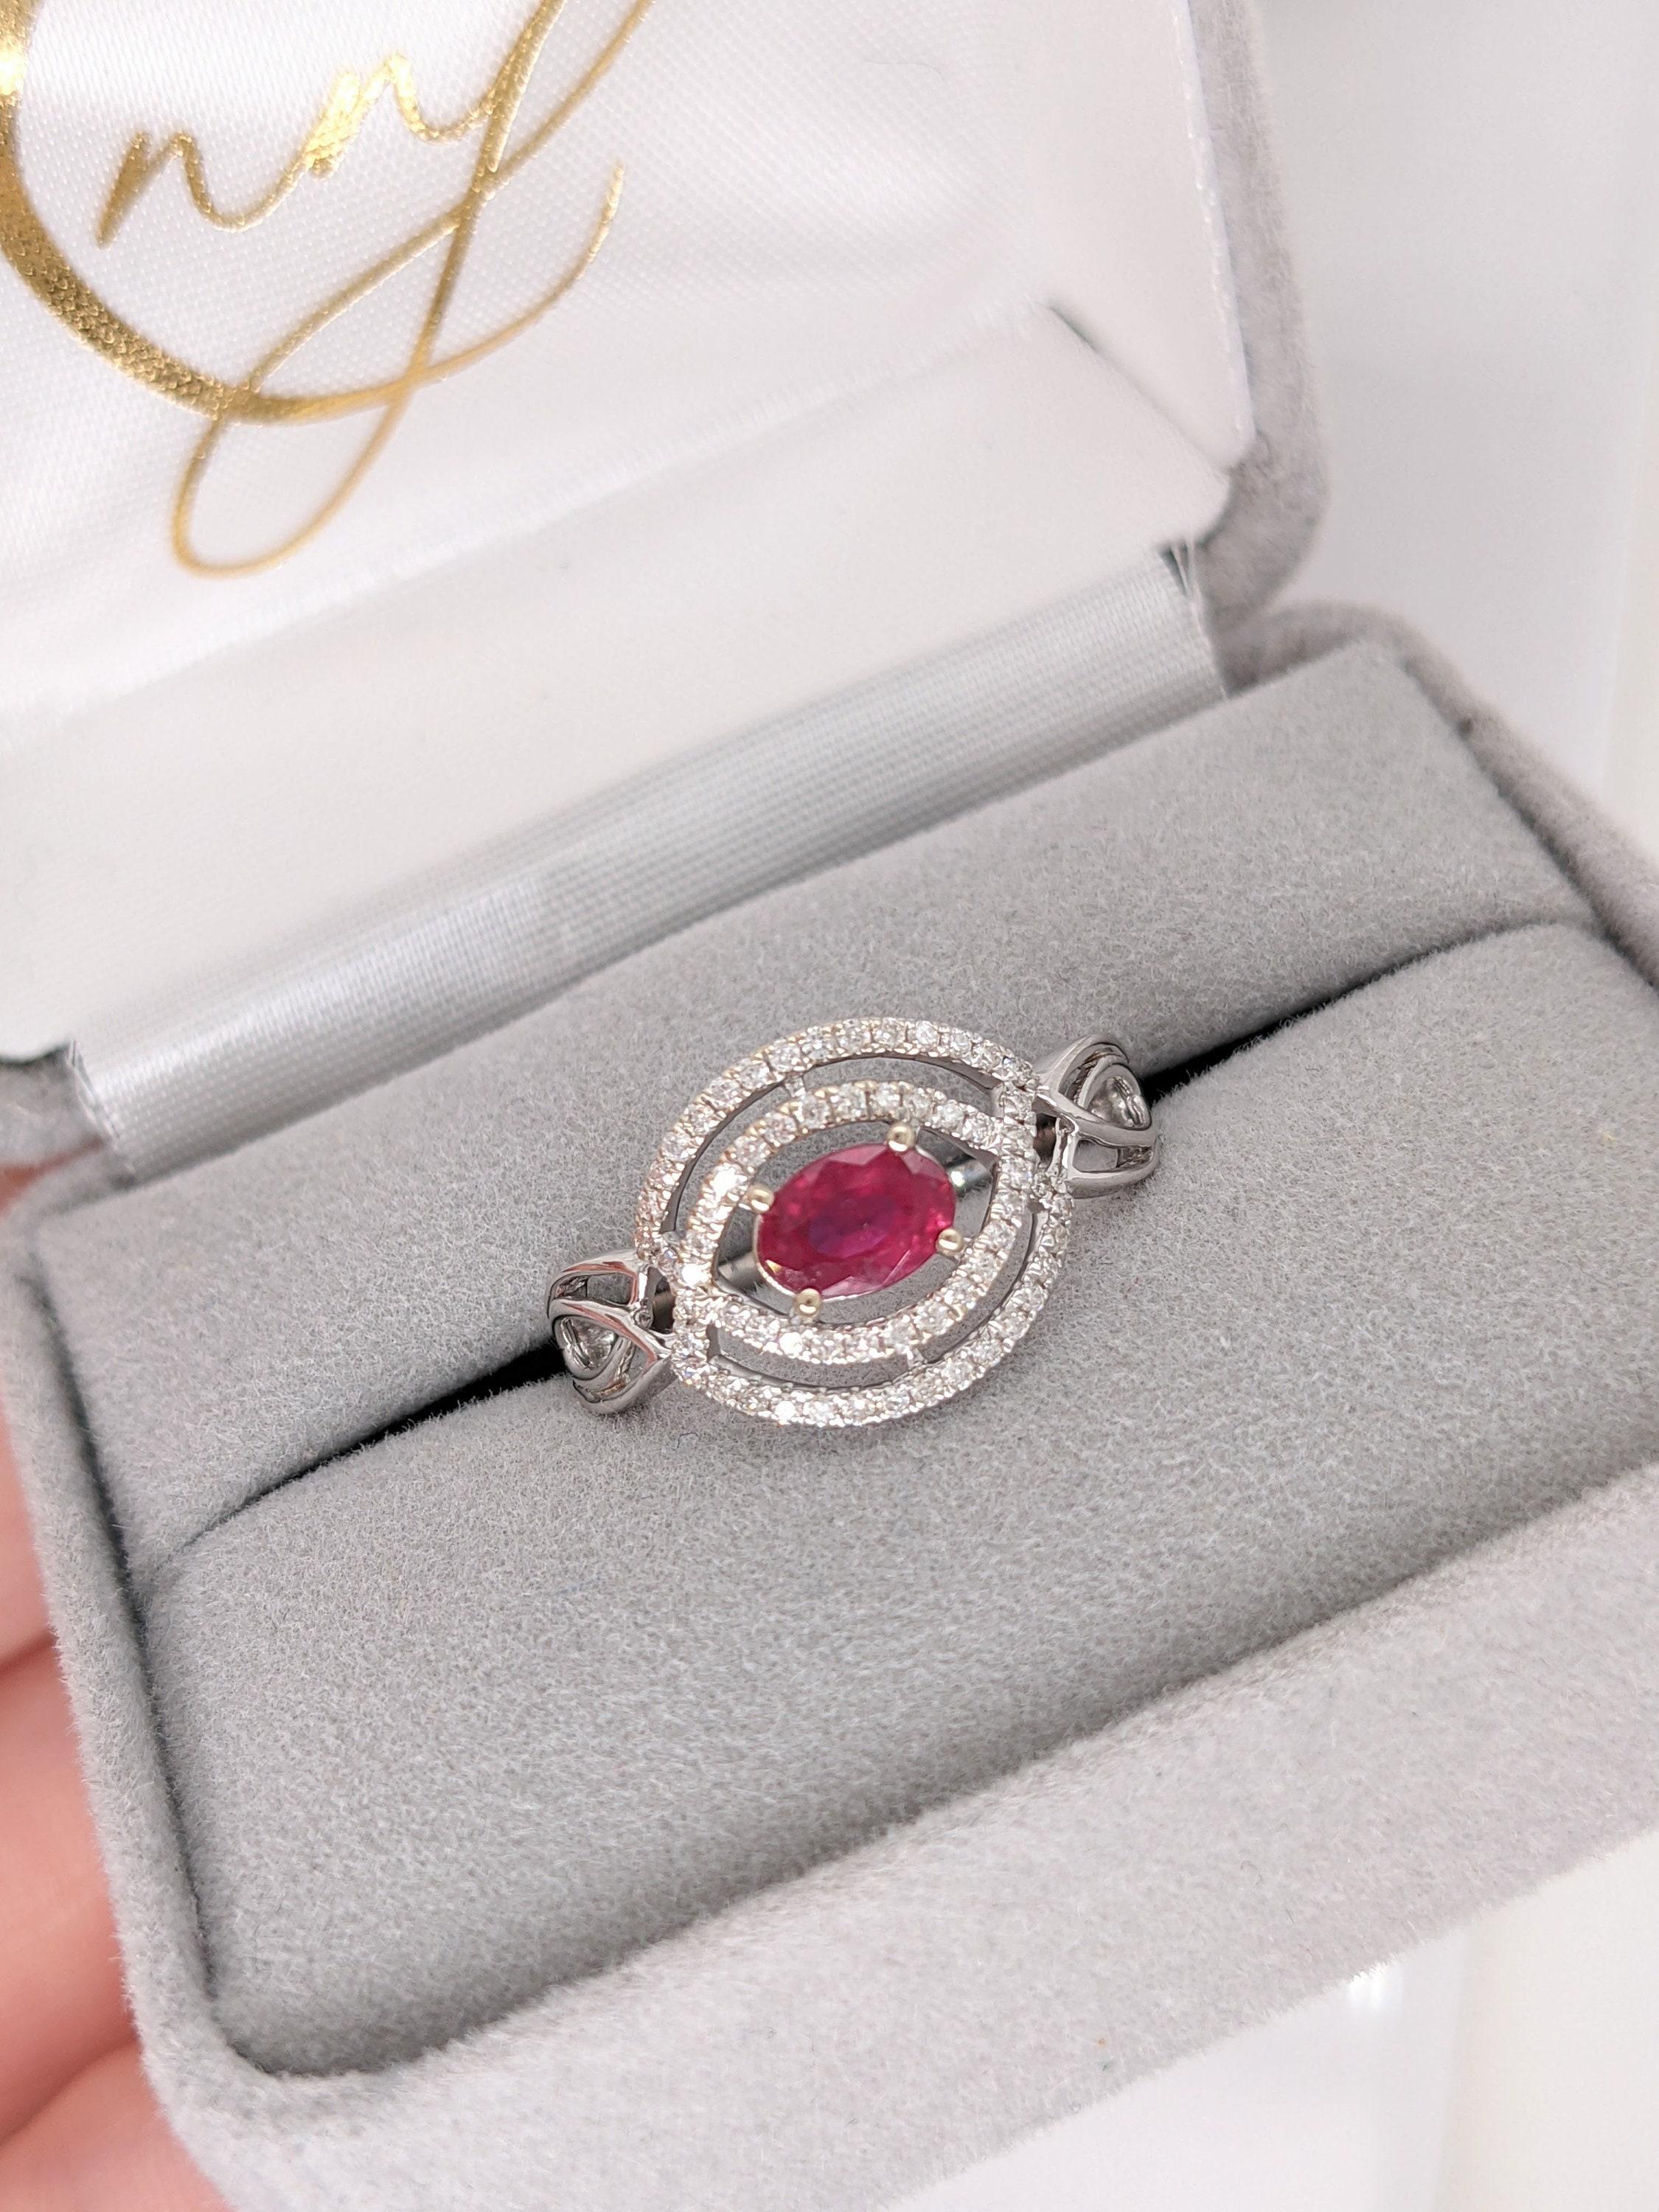 East West Red Ruby Ring w Earth Mined Diamond in Solid 14k White Gold Oval 6x4mm For Sale 2